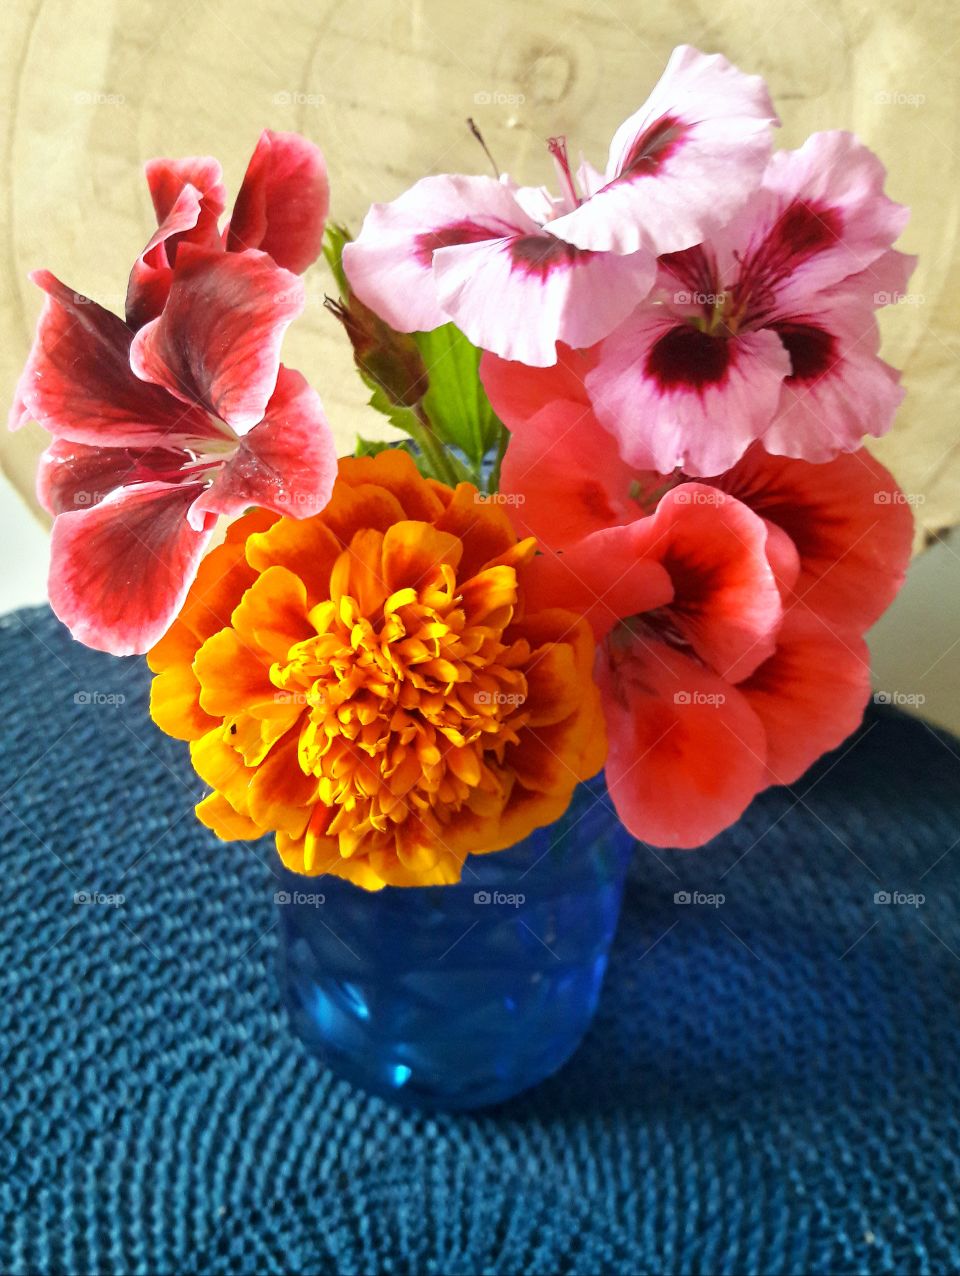 i picked a few flowers from my little garden, it always makes me happy to see the beautiful colors.